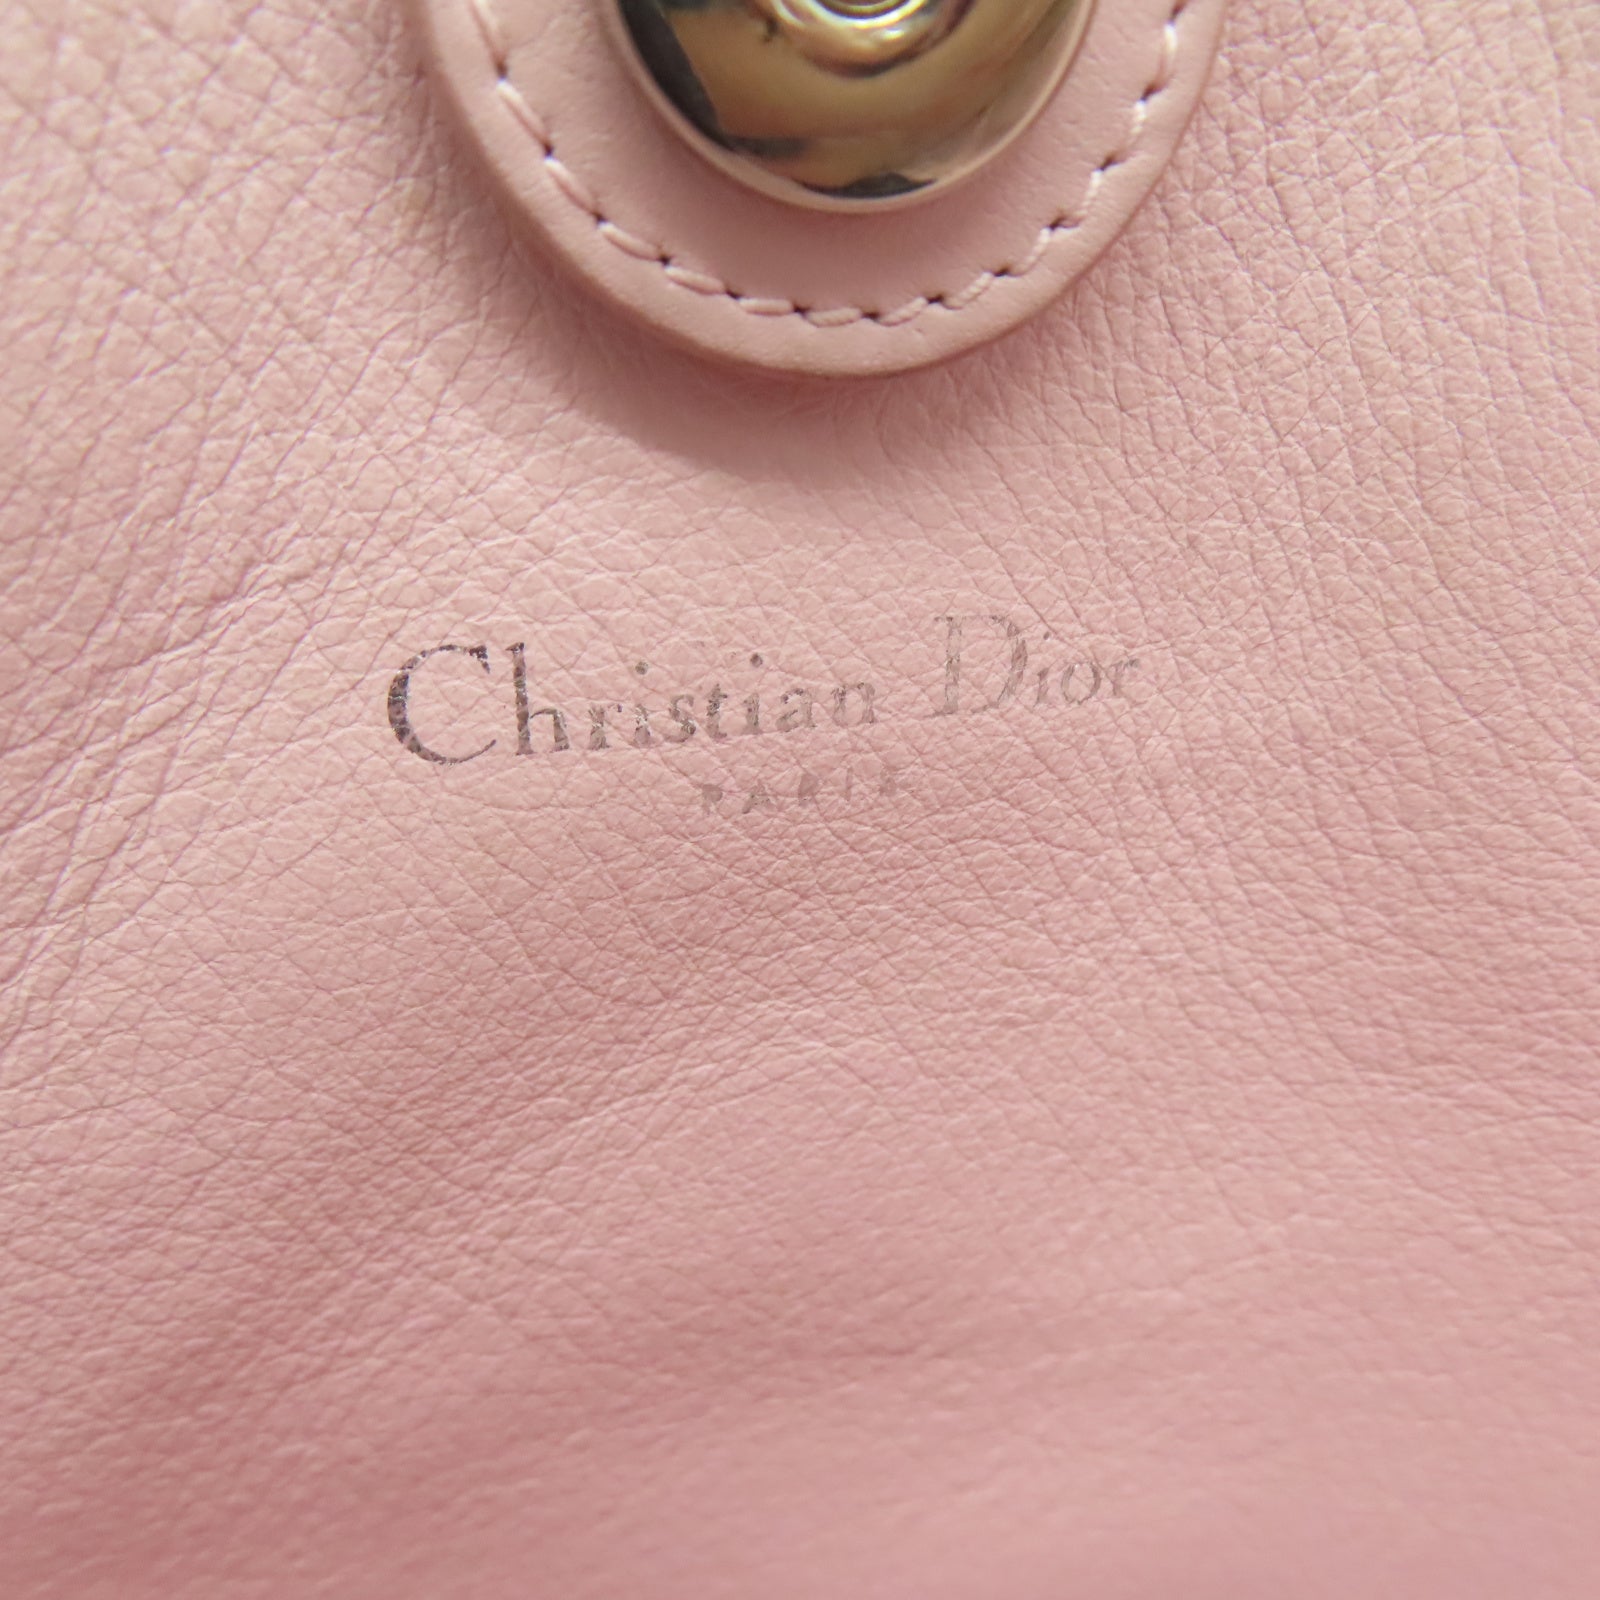 Christian Dior Addict Shopping Tote Vertical Bag – AMUSED Co